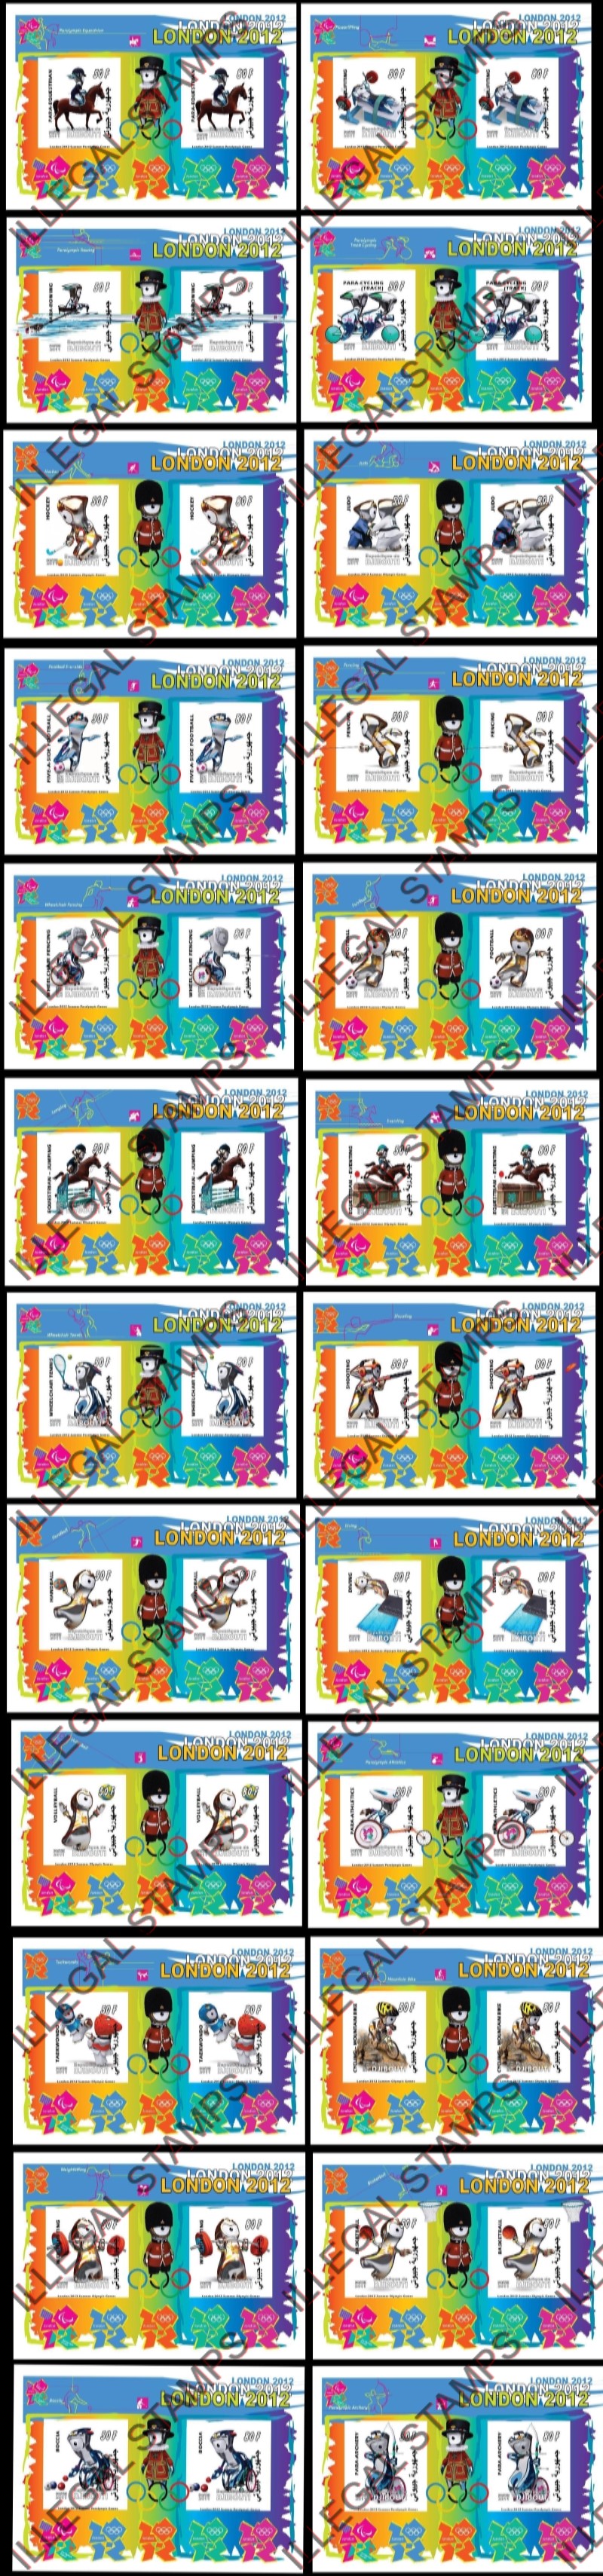 Djibouti 2011 London Paralympic Games Illegal Stamp Souvenir Sheets of 2 Part 1